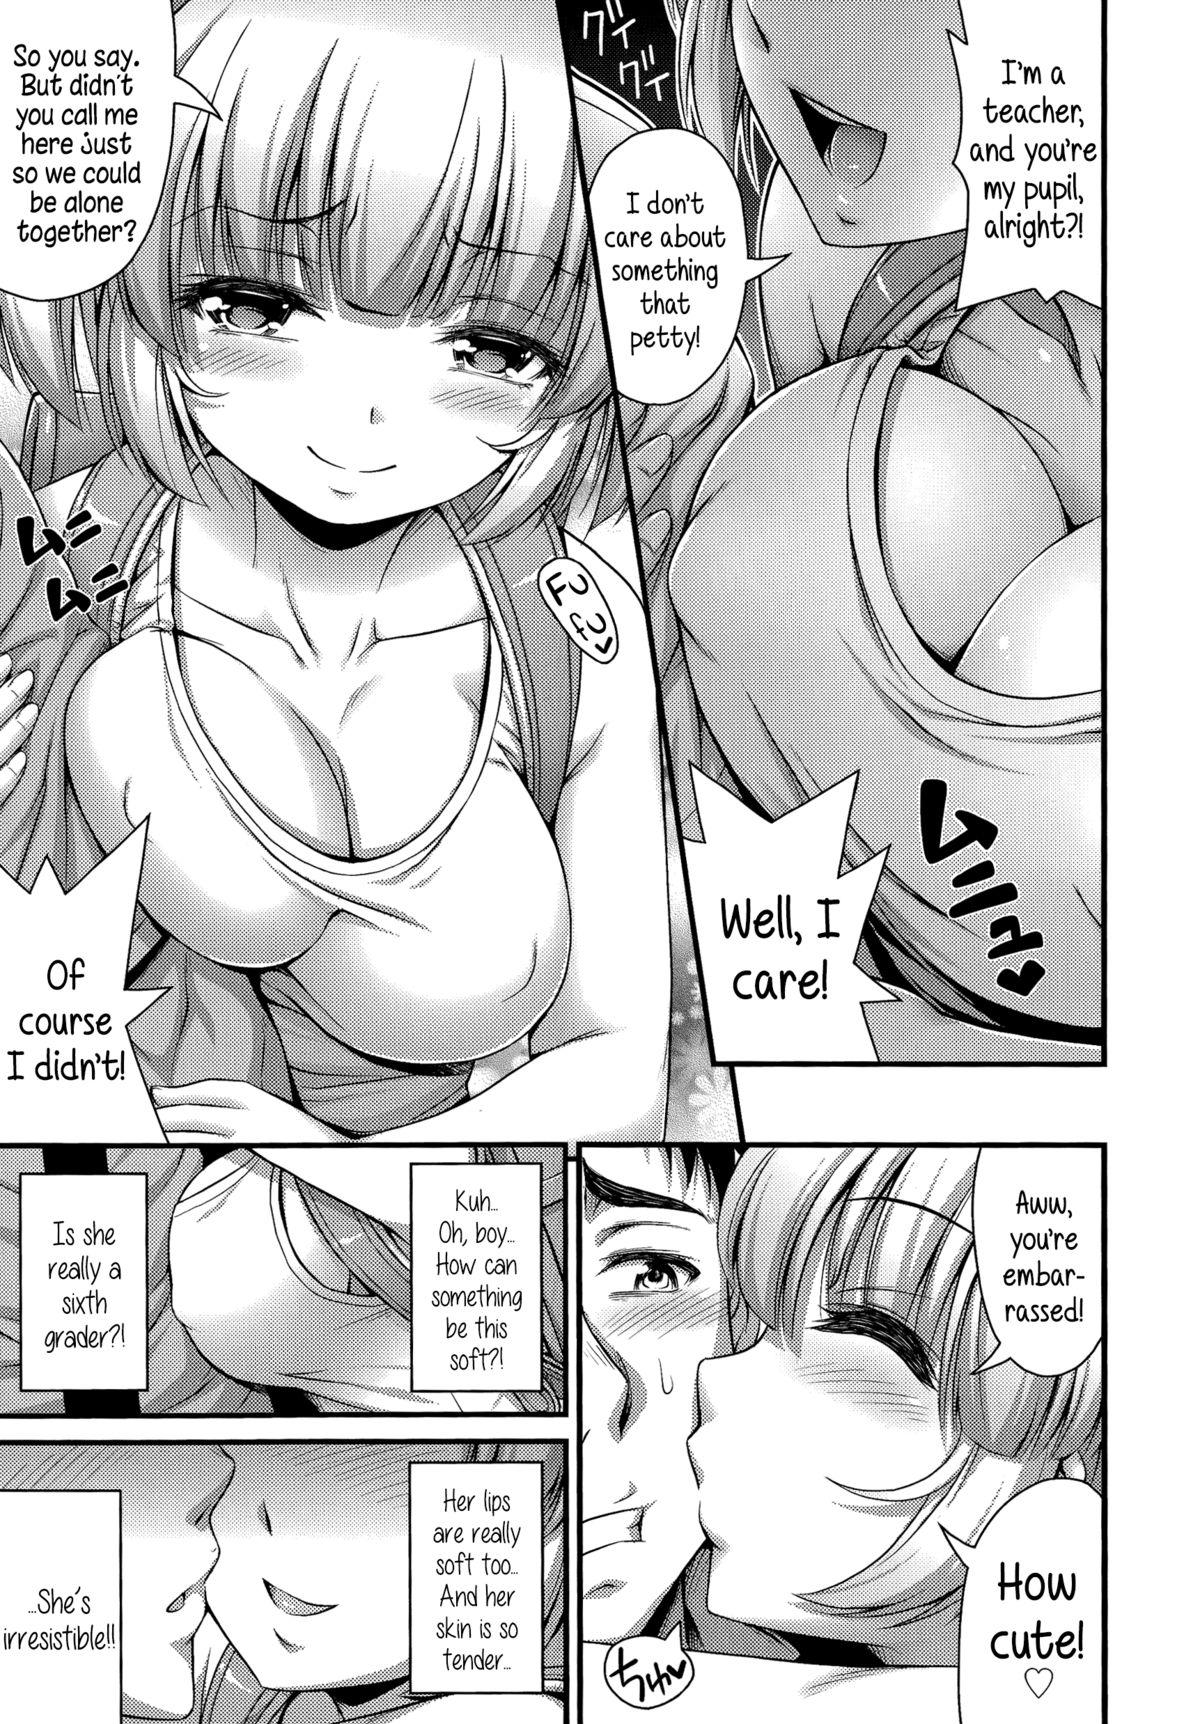 Youth Porn American Style Hentai - Page 5